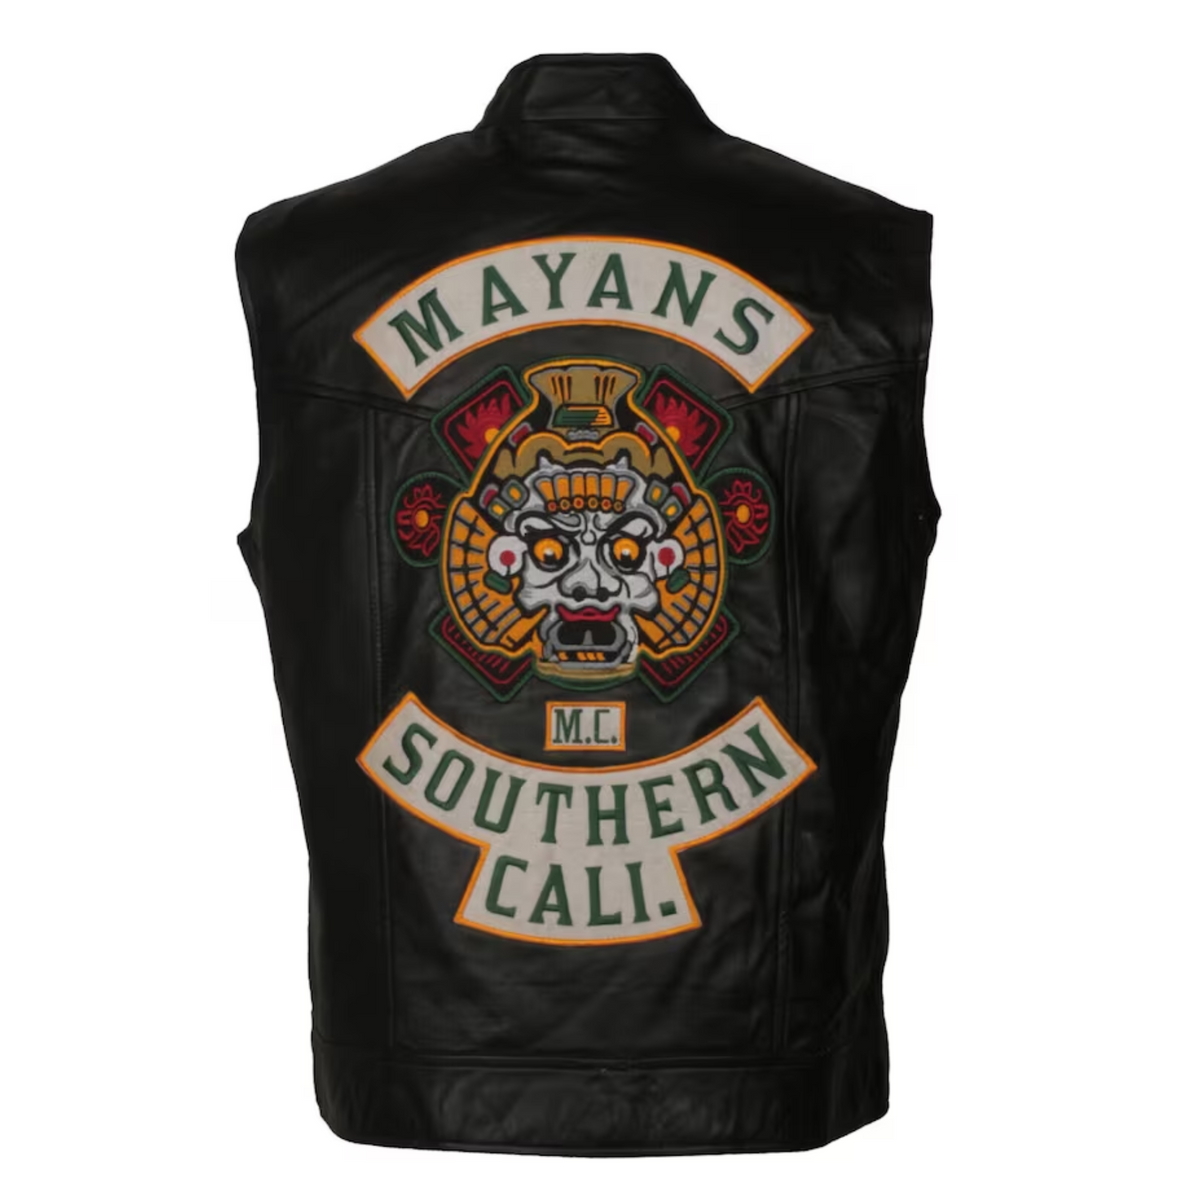 Michael Irby MAYANS Men's Biker Black Leather Vest: Custom Embroidery - Perfect Gift for Him